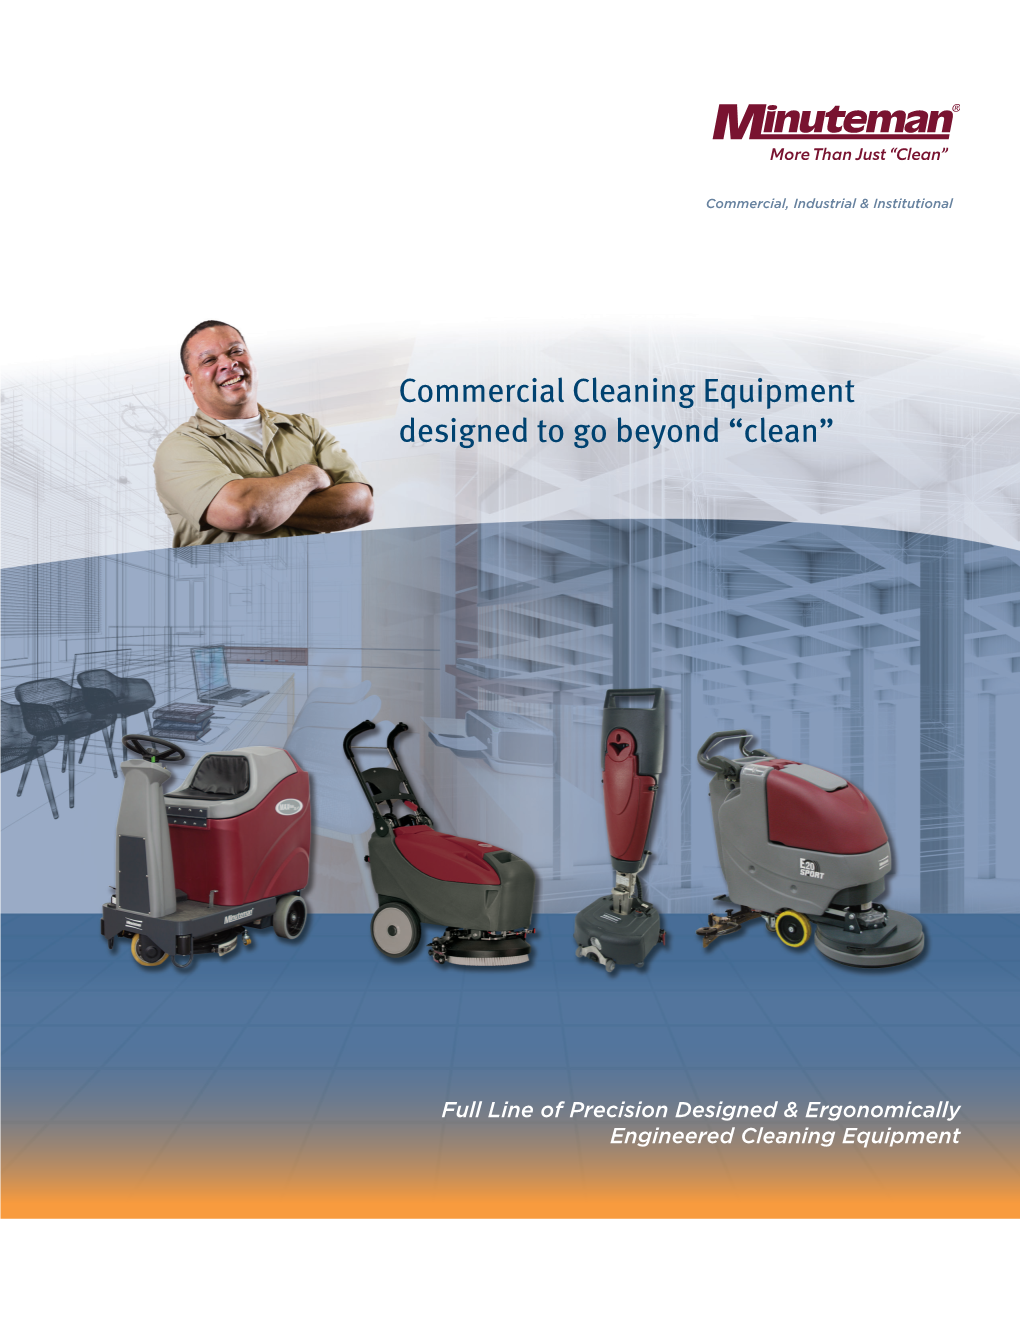 Commercial Cleaning Equipment Designed to Go Beyond “Clean”